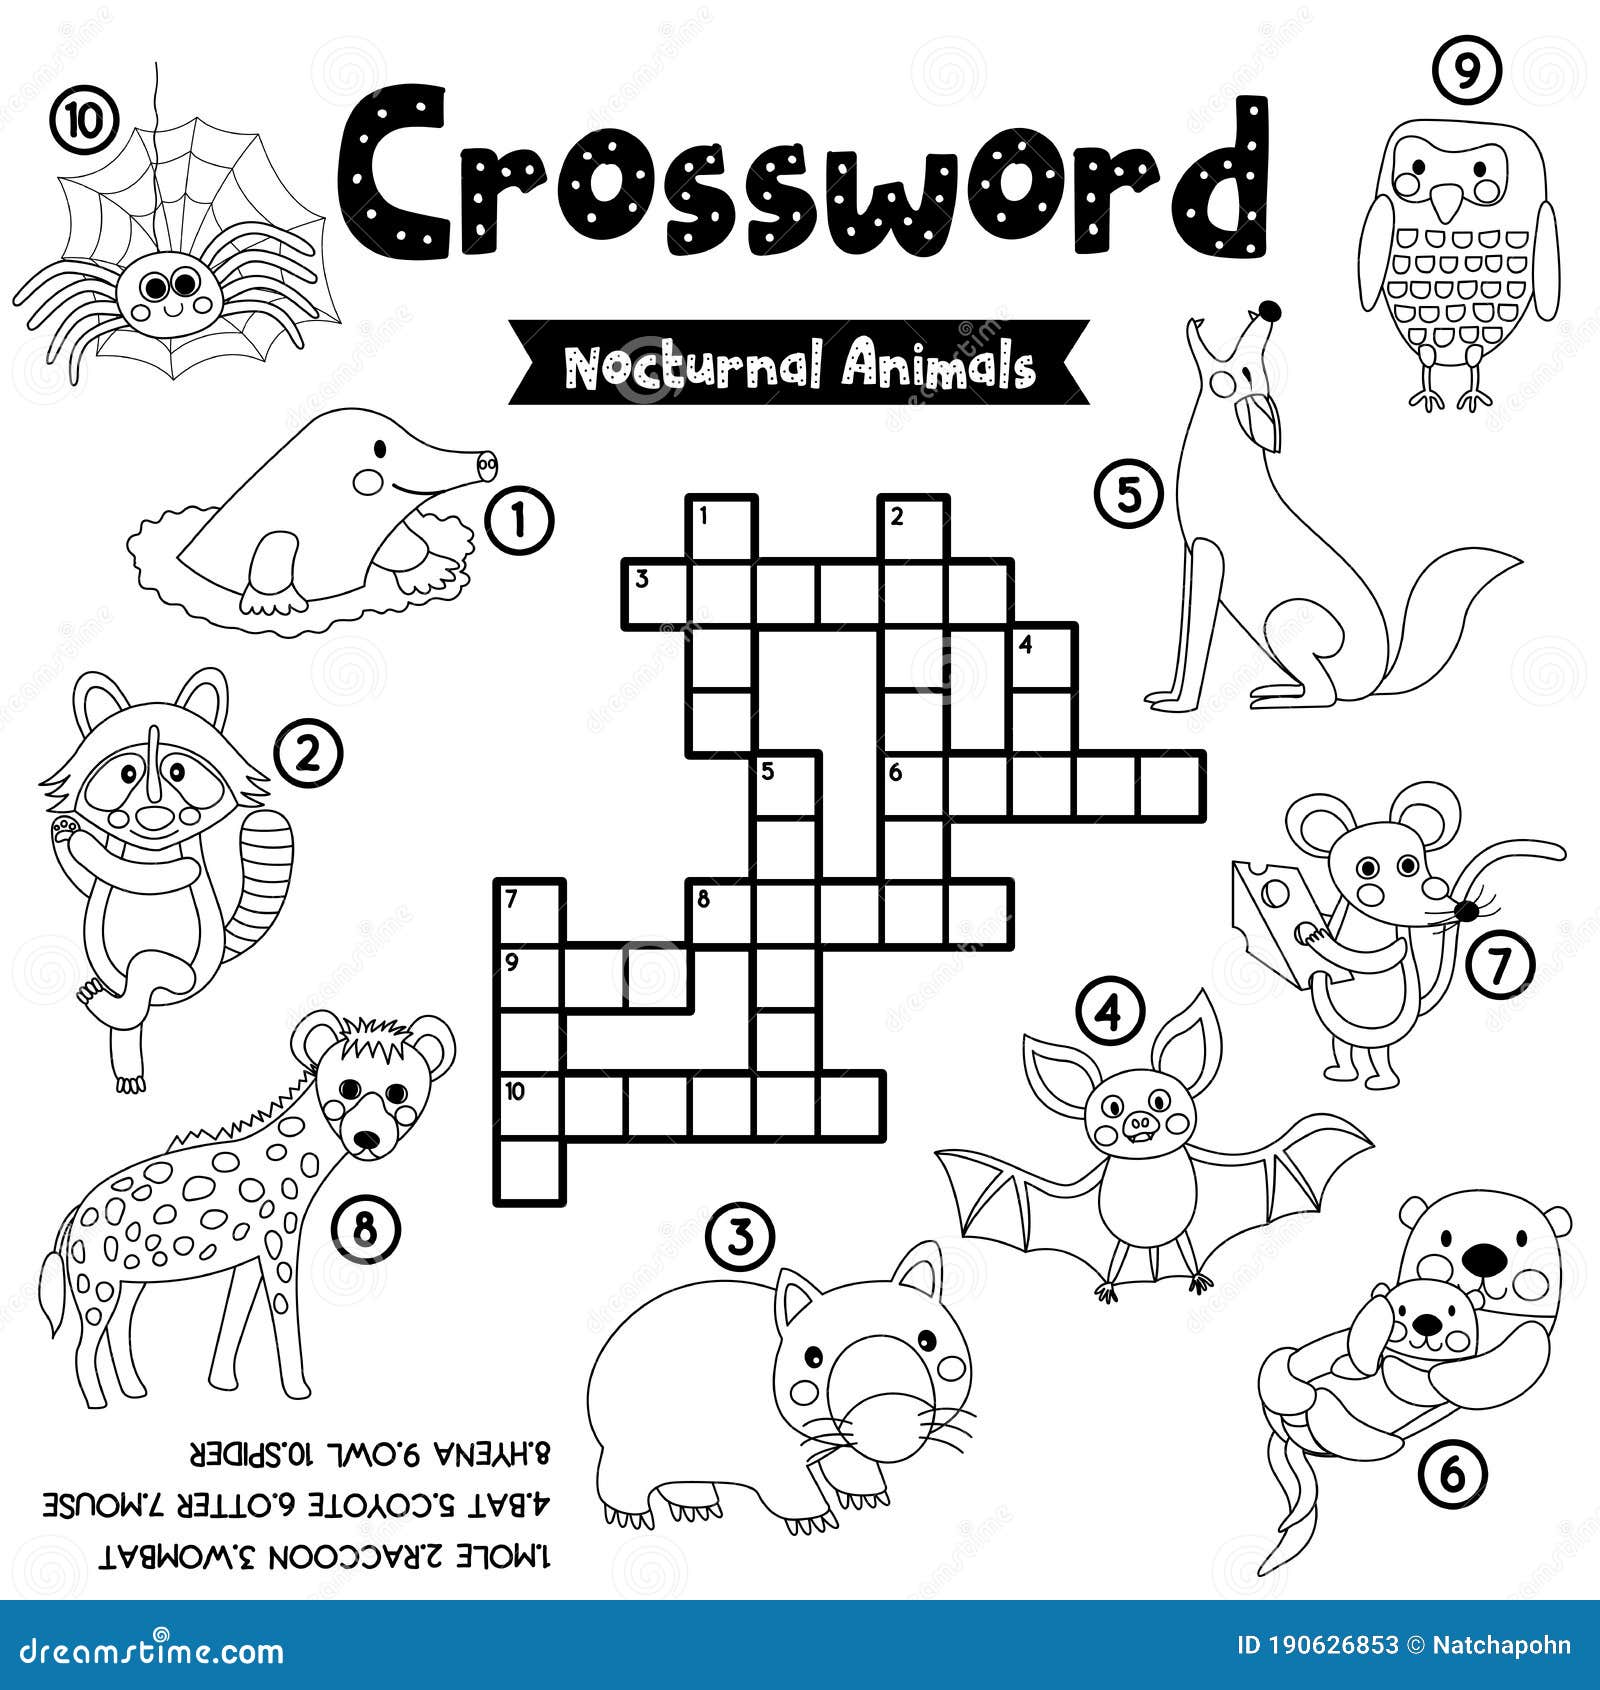 Crossword Puzzle Nocturnal Animals Coloring Version Stock Vector ...